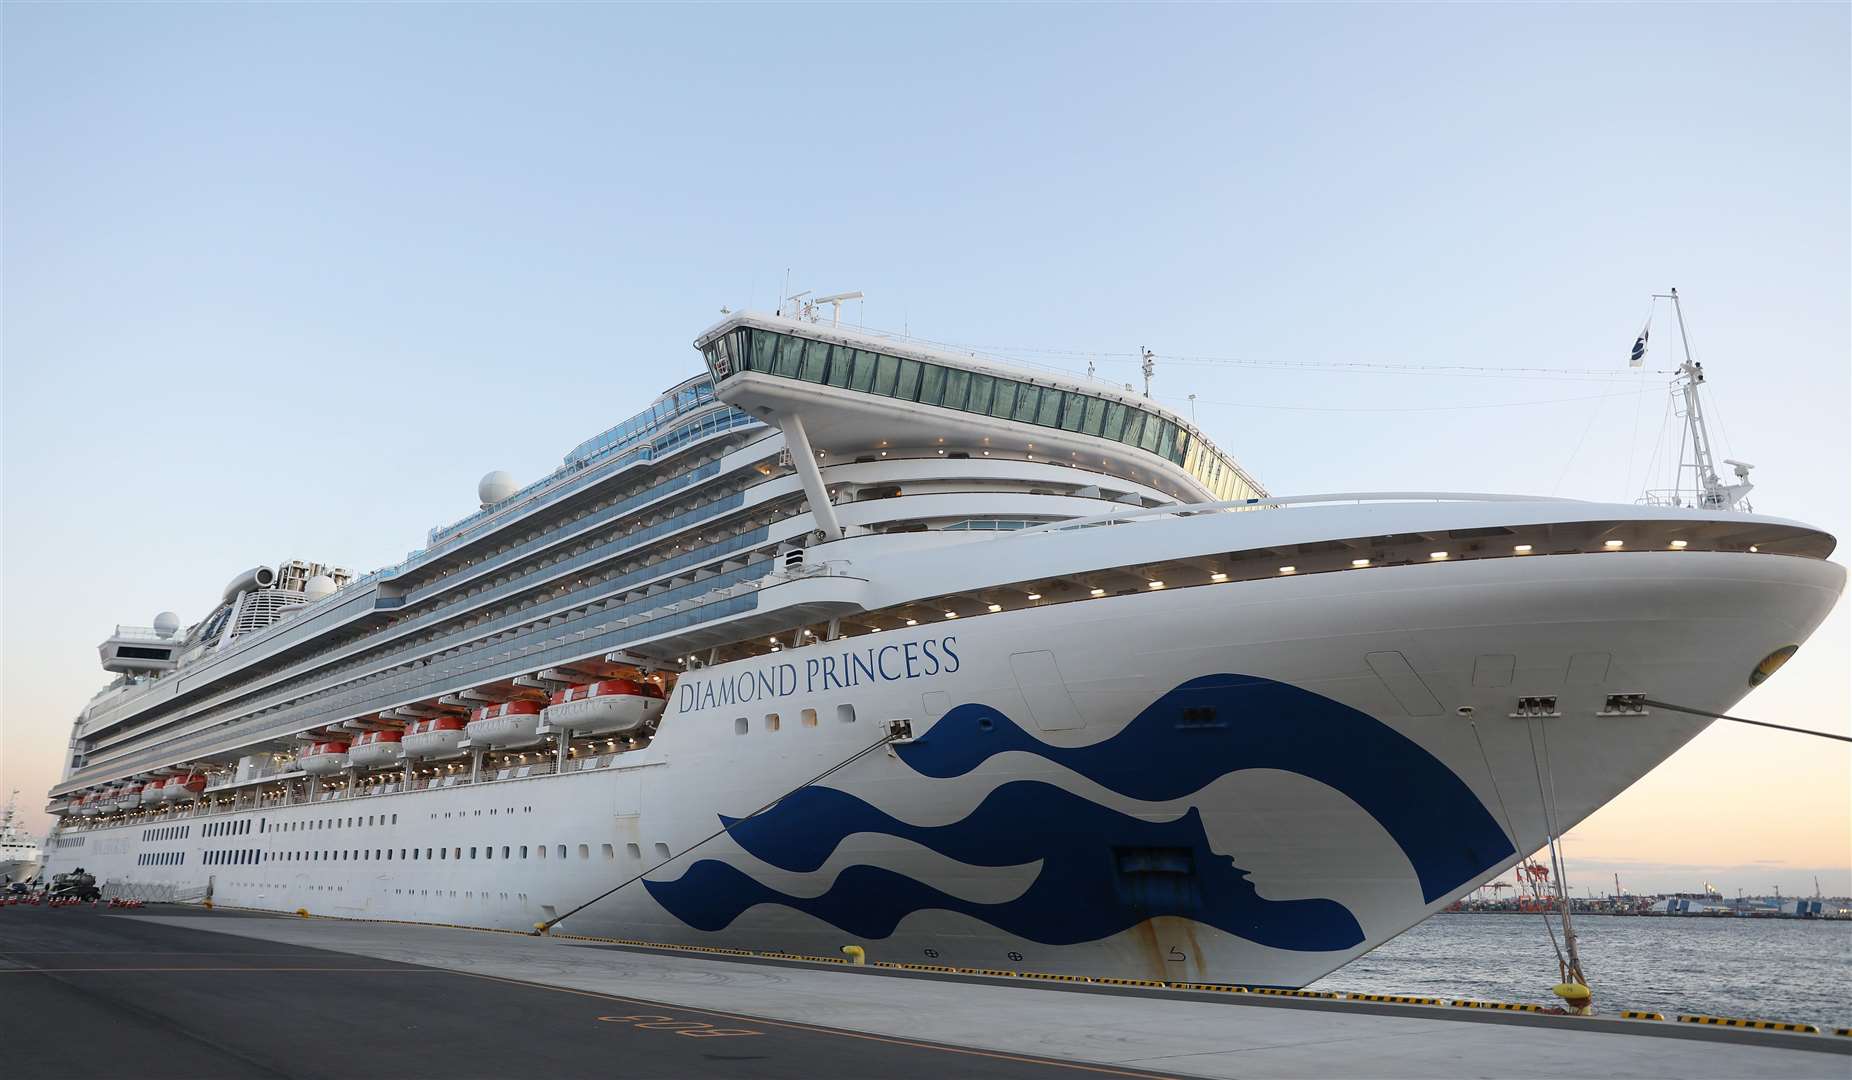 The Diamond Princess cruise ship, which has been kept in quarantine at the port of Yokohama in Japan. Picture: Du Xiaoyi/50120717